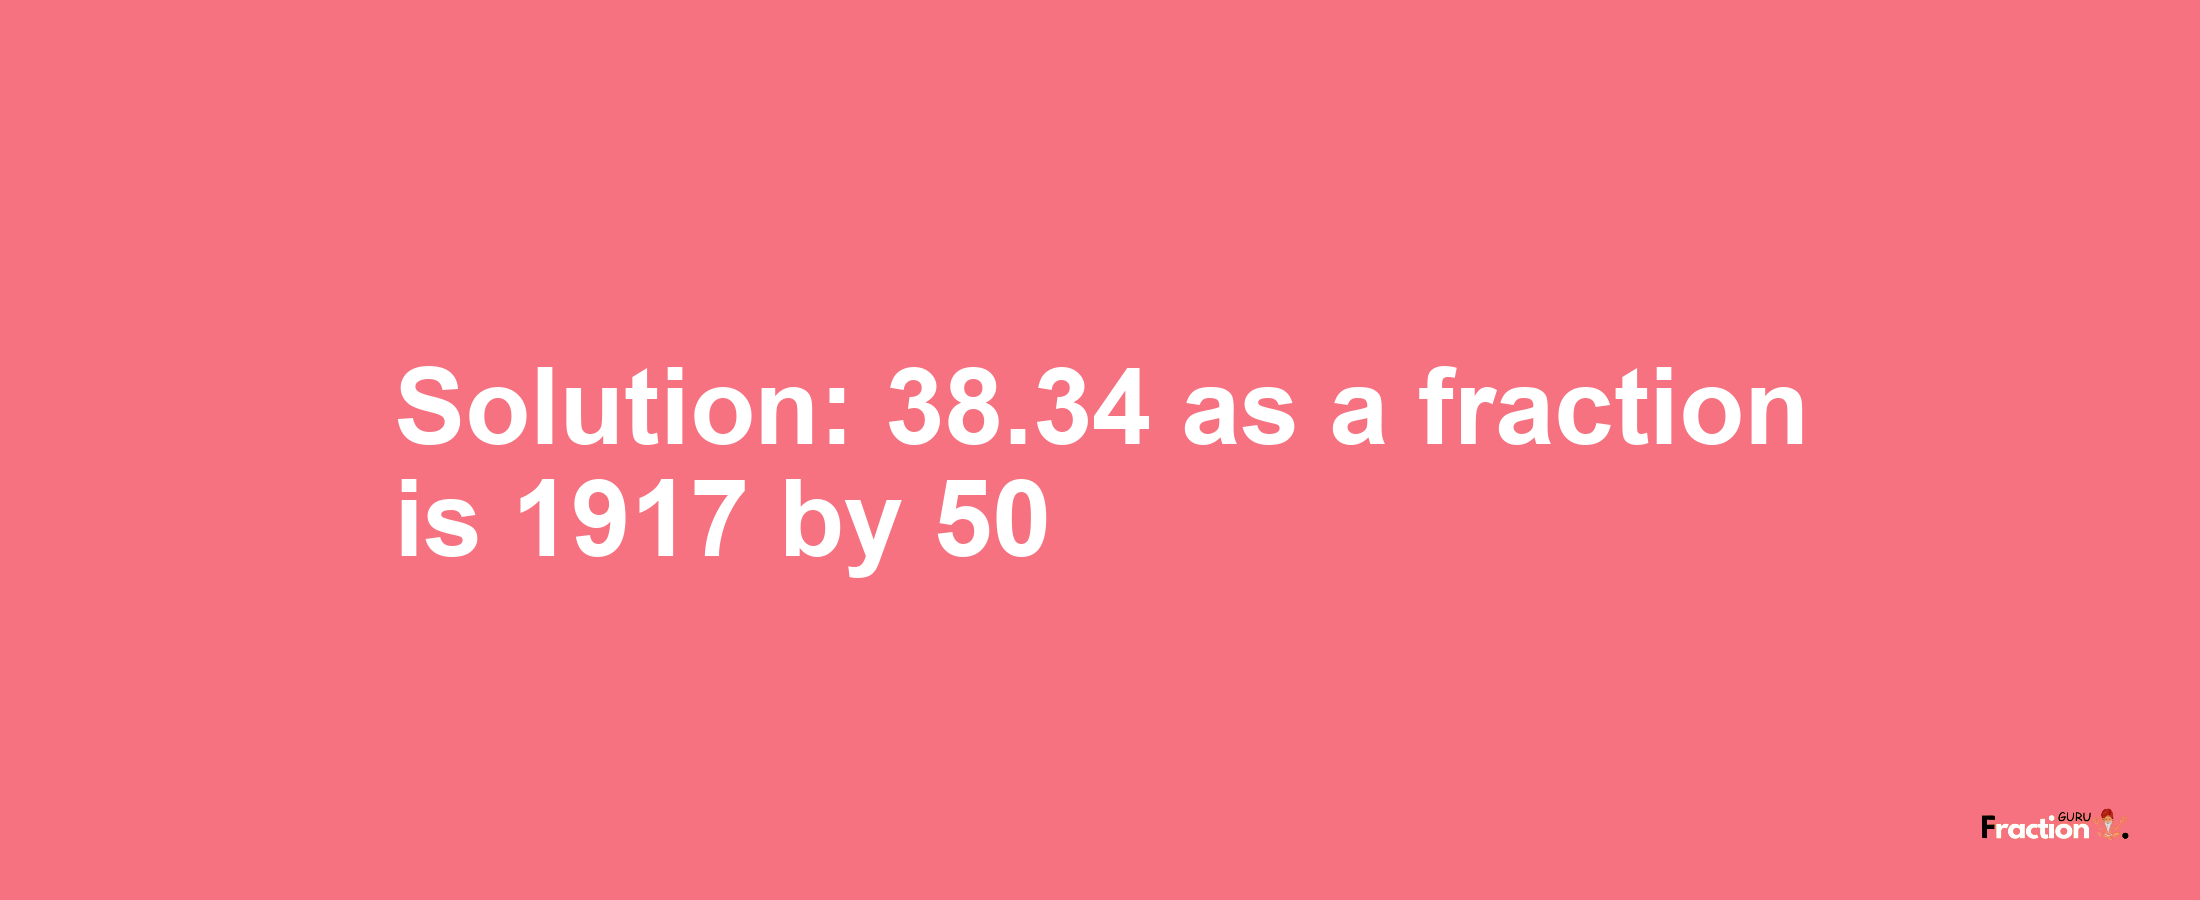 Solution:38.34 as a fraction is 1917/50